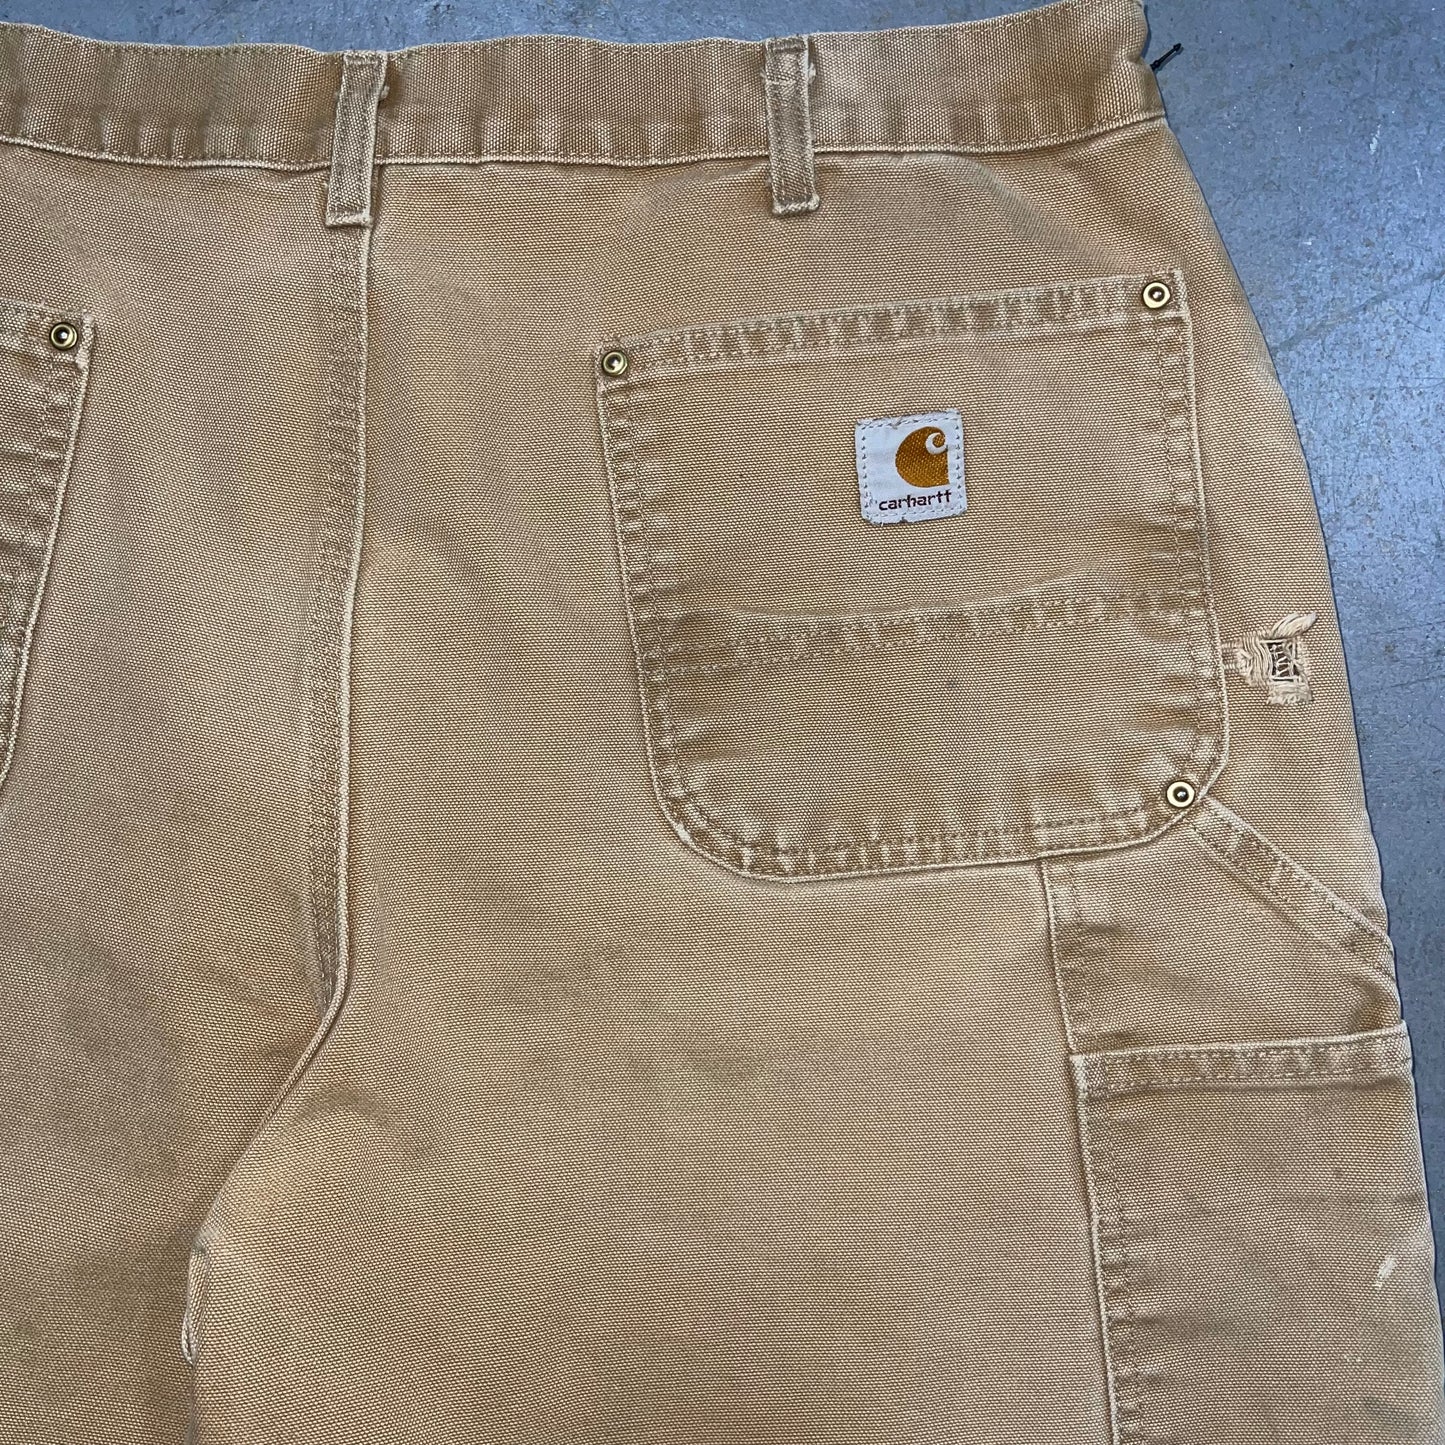 Carhartt Dungaree Fit Double Knee Pants. 38x34